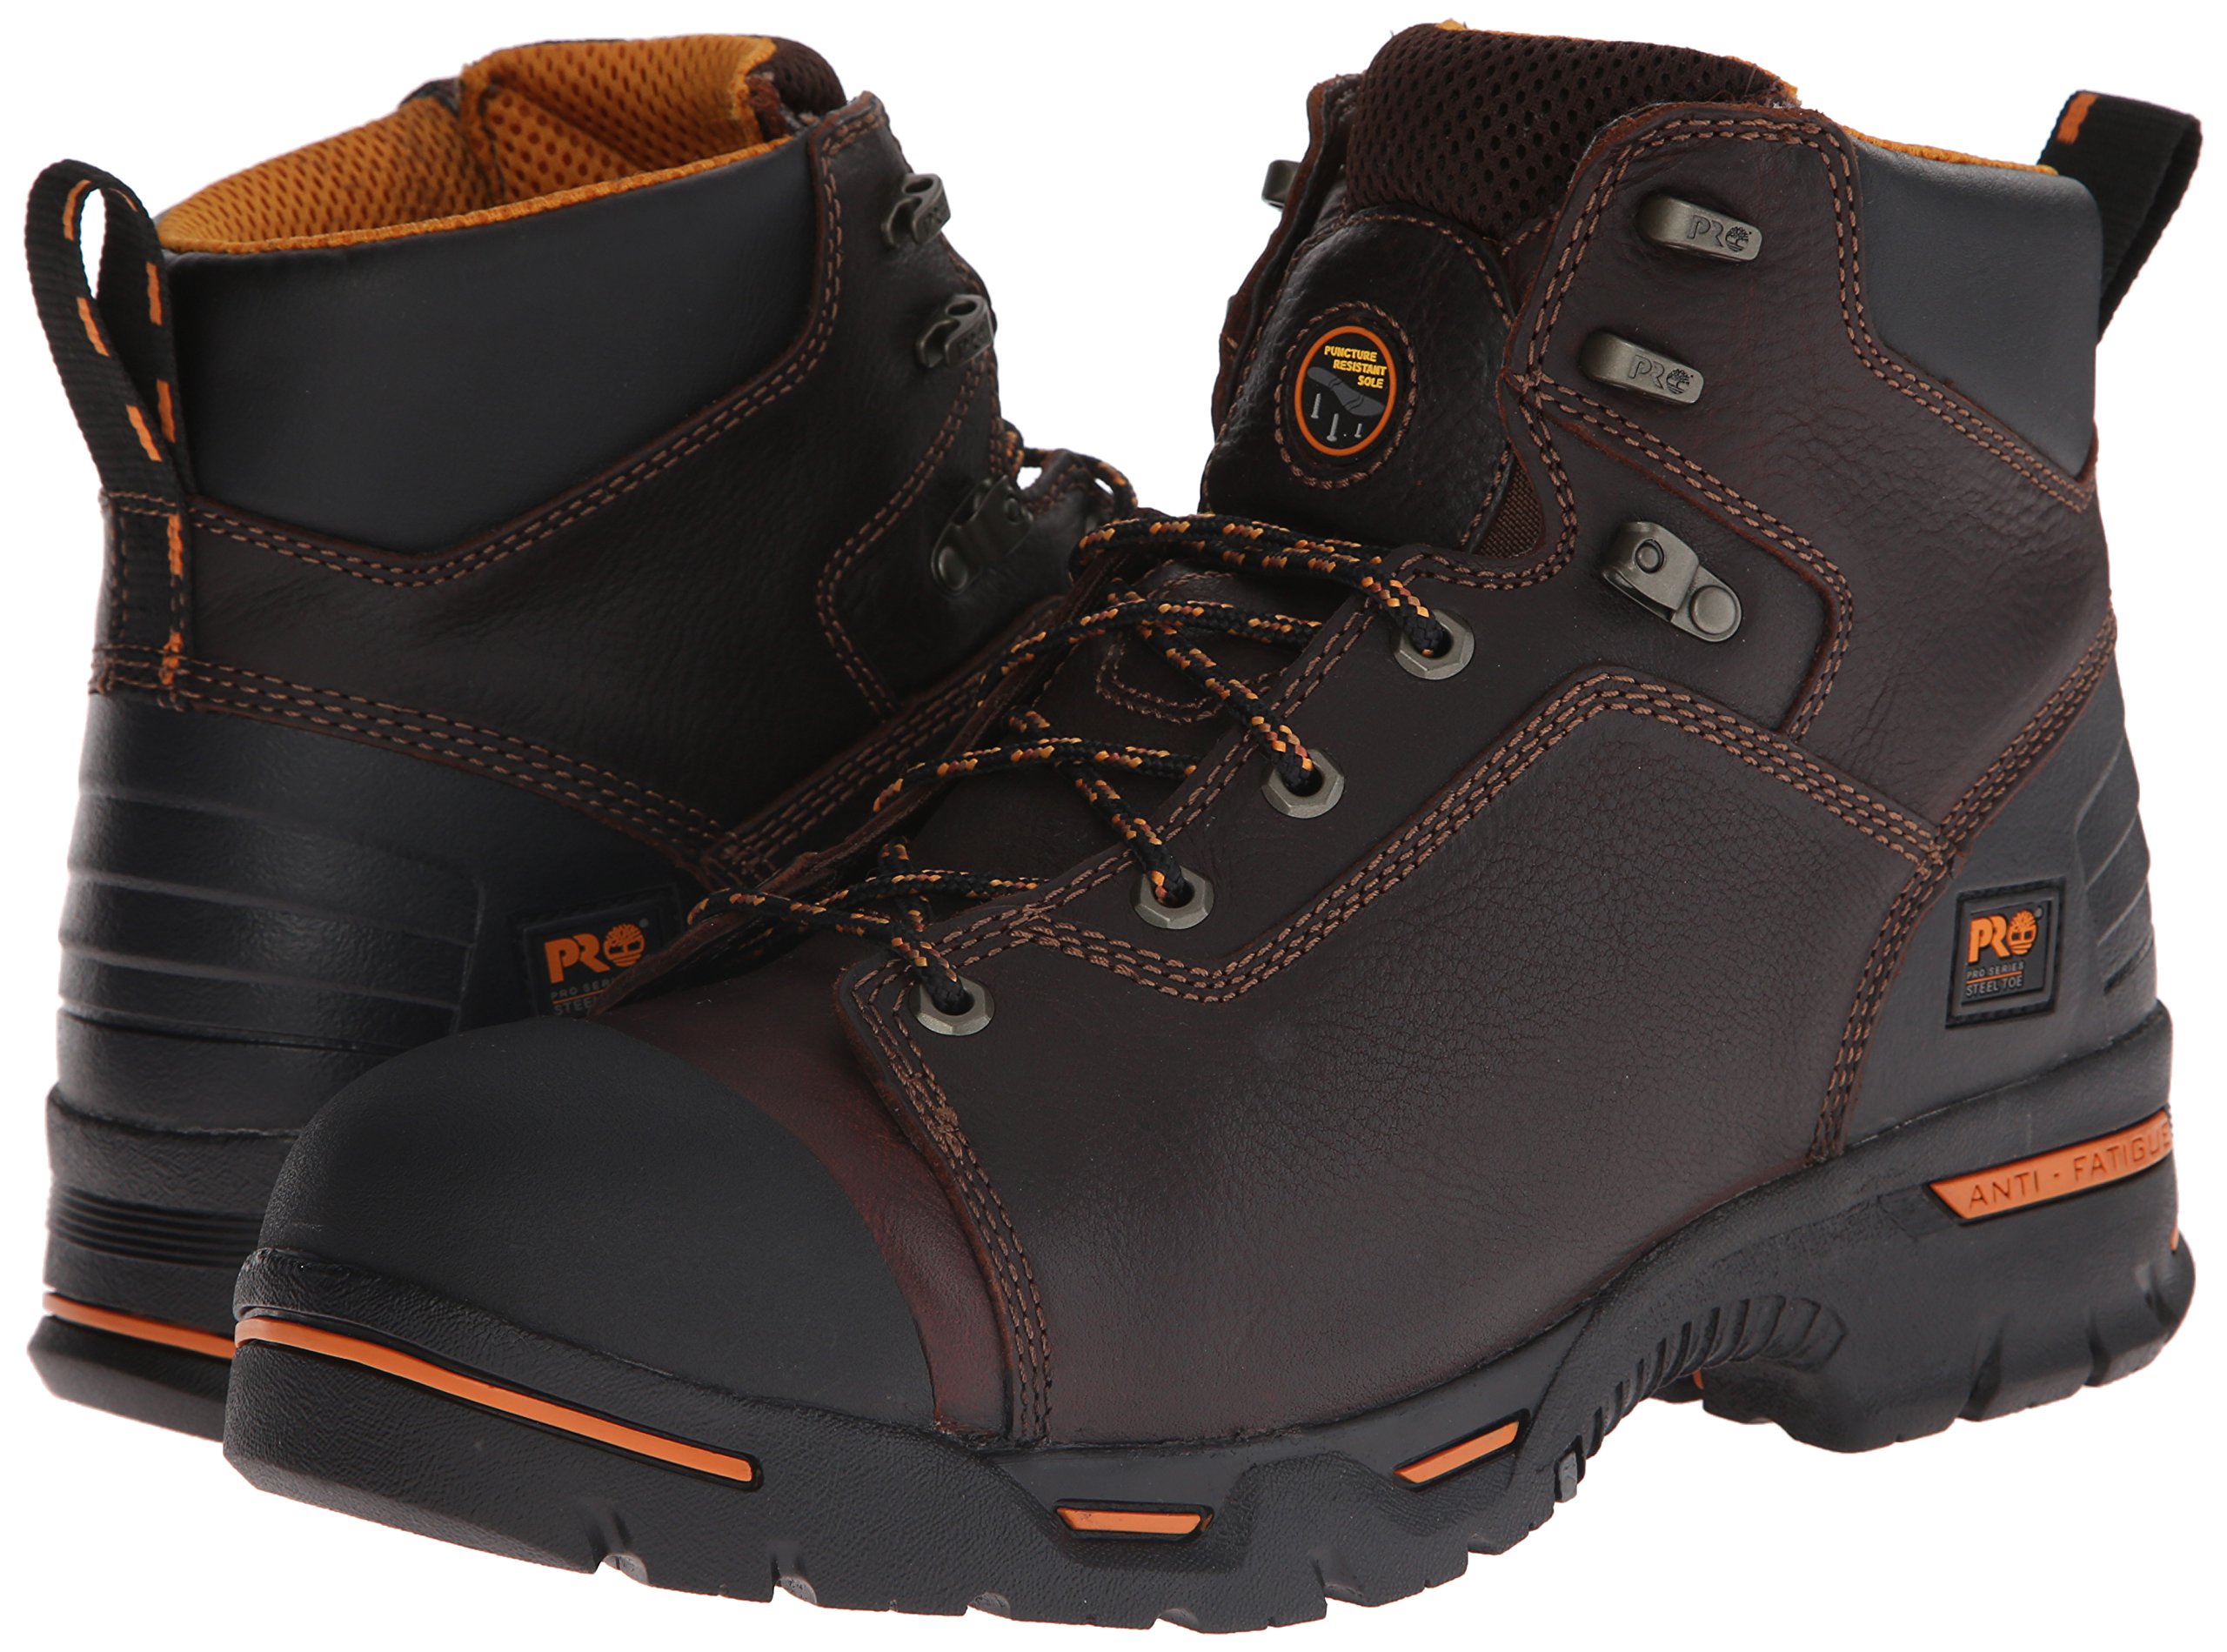 Timberland PRO Men's Endurance 6 Inch Steel Safety Toe Puncture Resistant Work Boot